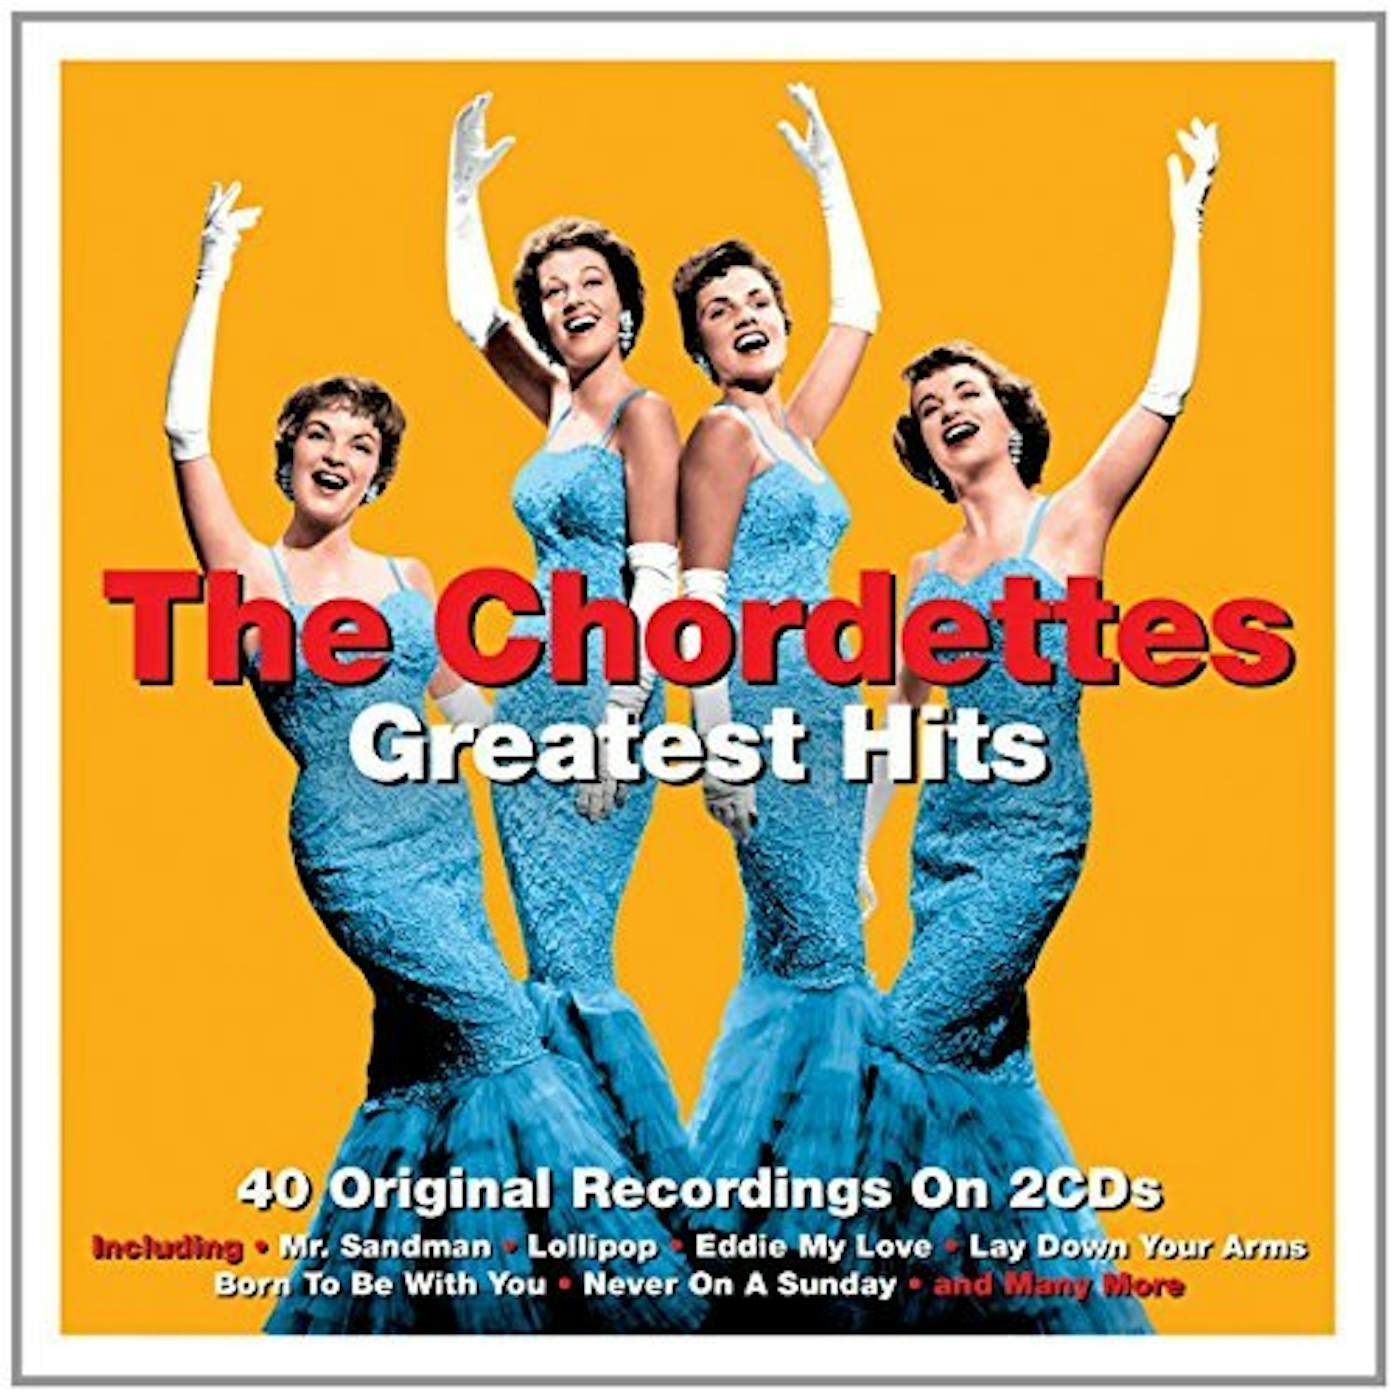 The Chordettes GREATEST HITS CD